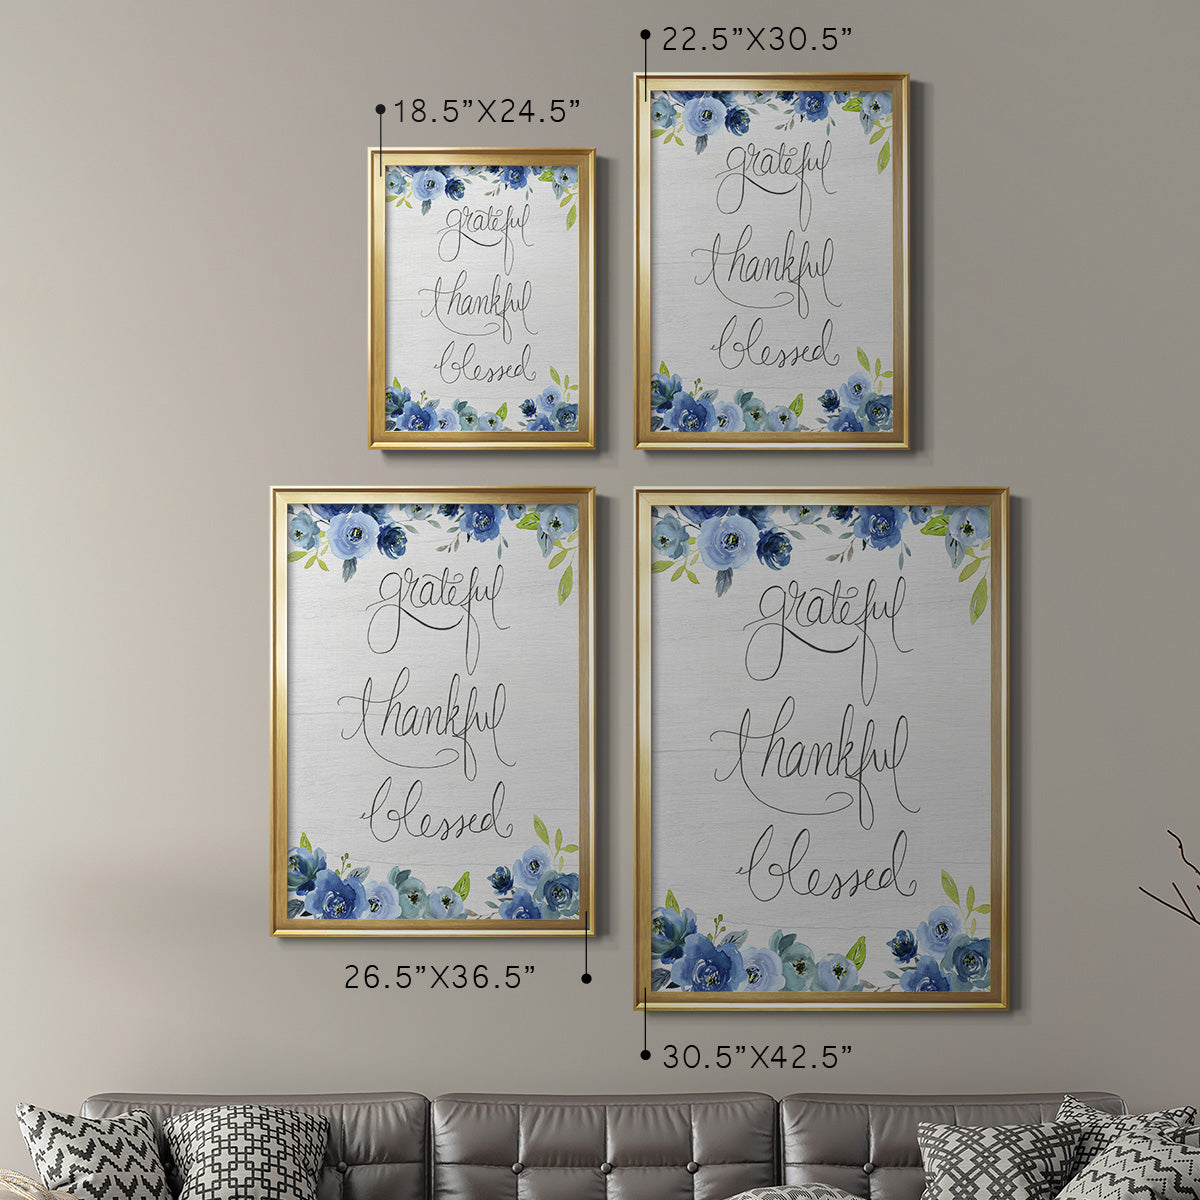 Grateful, Thankful, Blessed Premium Framed Print - Ready to Hang